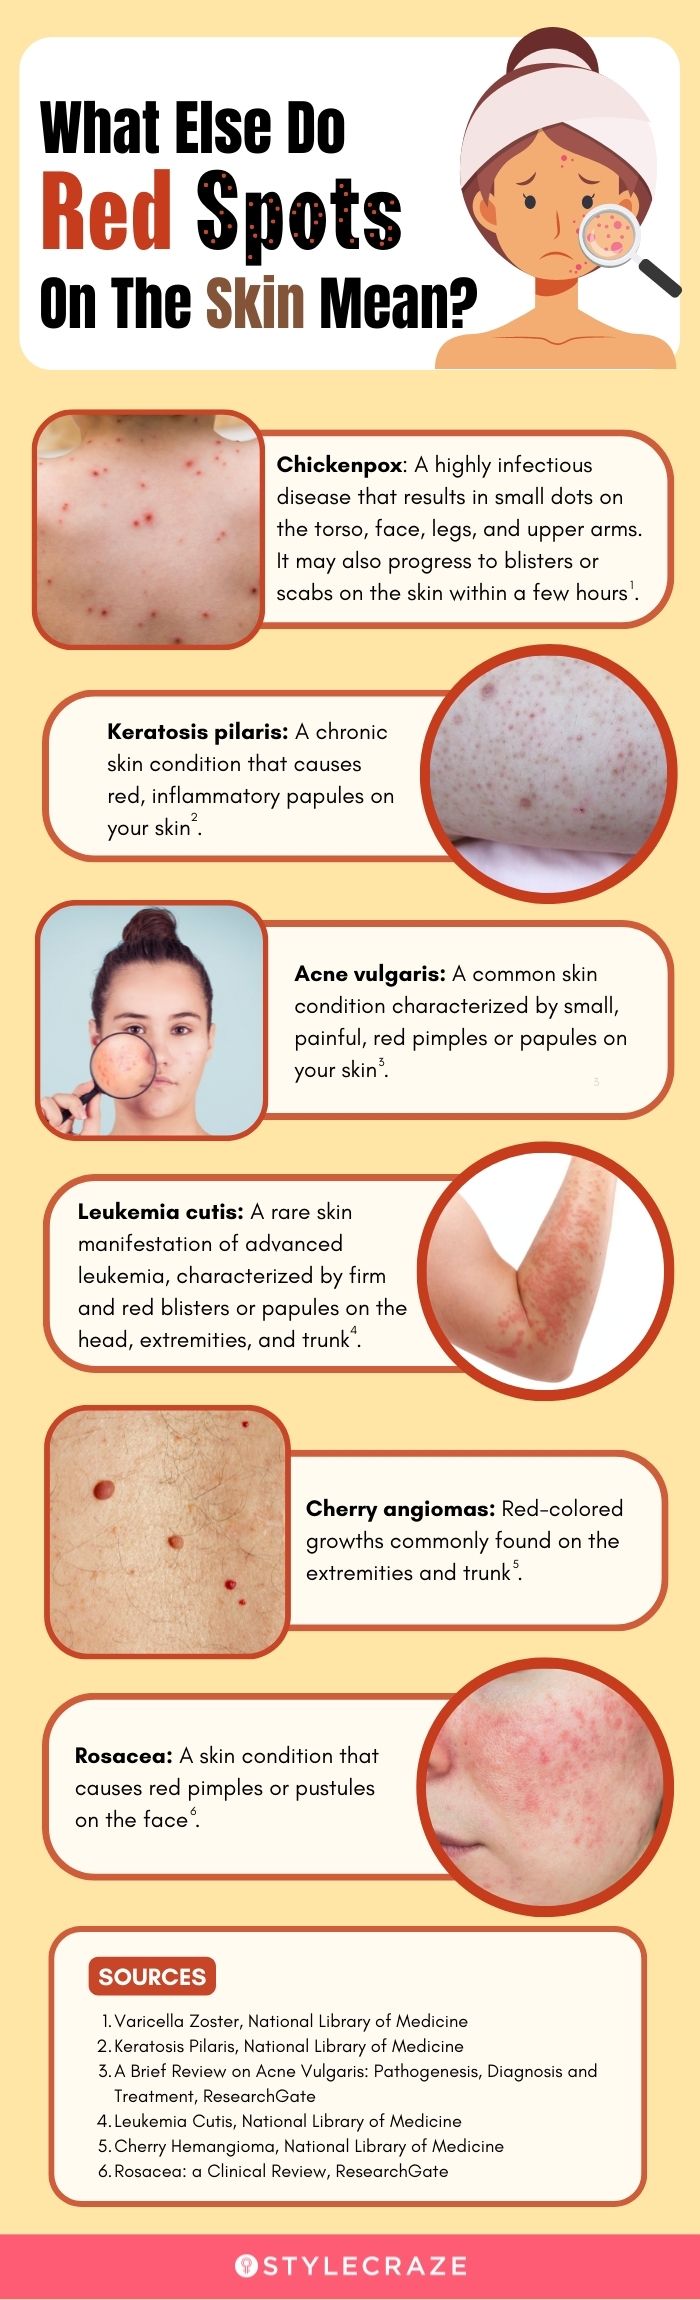 what else do red spots on the skin mean (infographic)